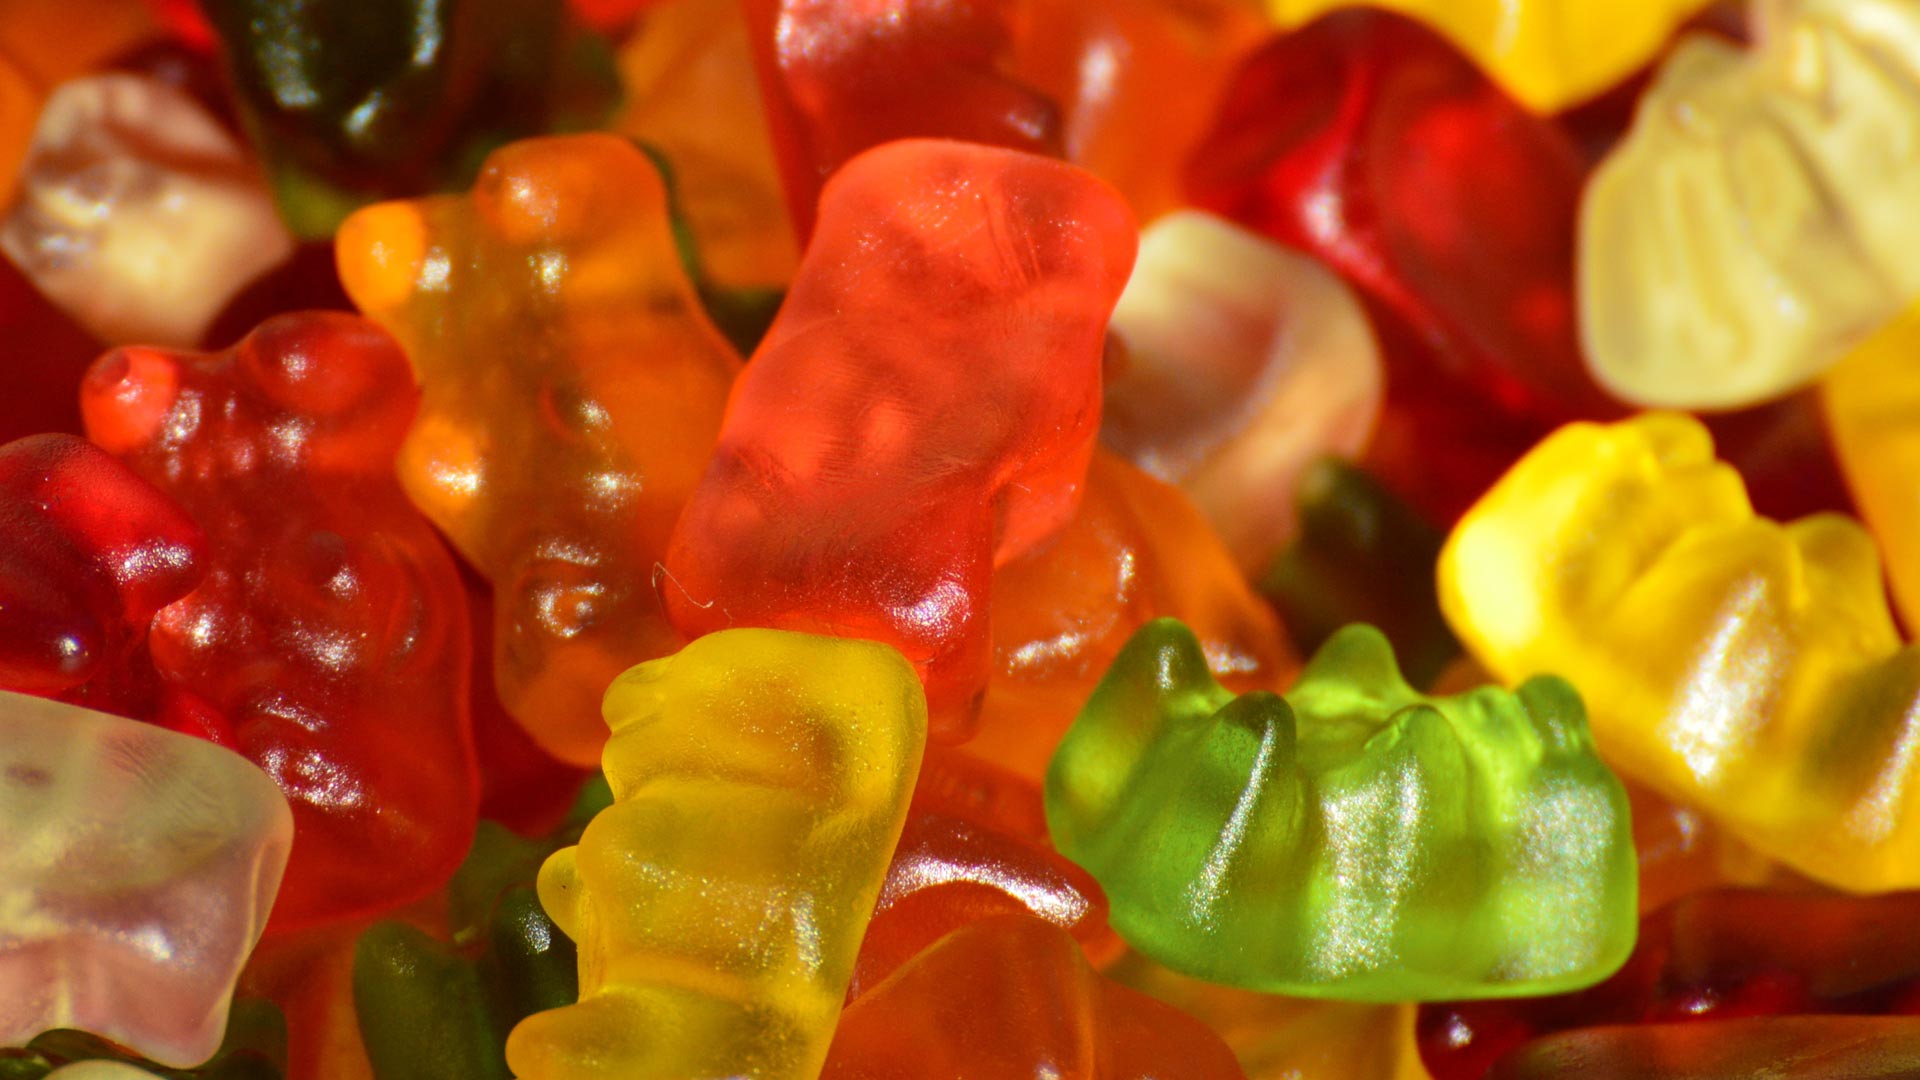 Haribo gave 6 packets of candy to the man who found his $4.6 million check